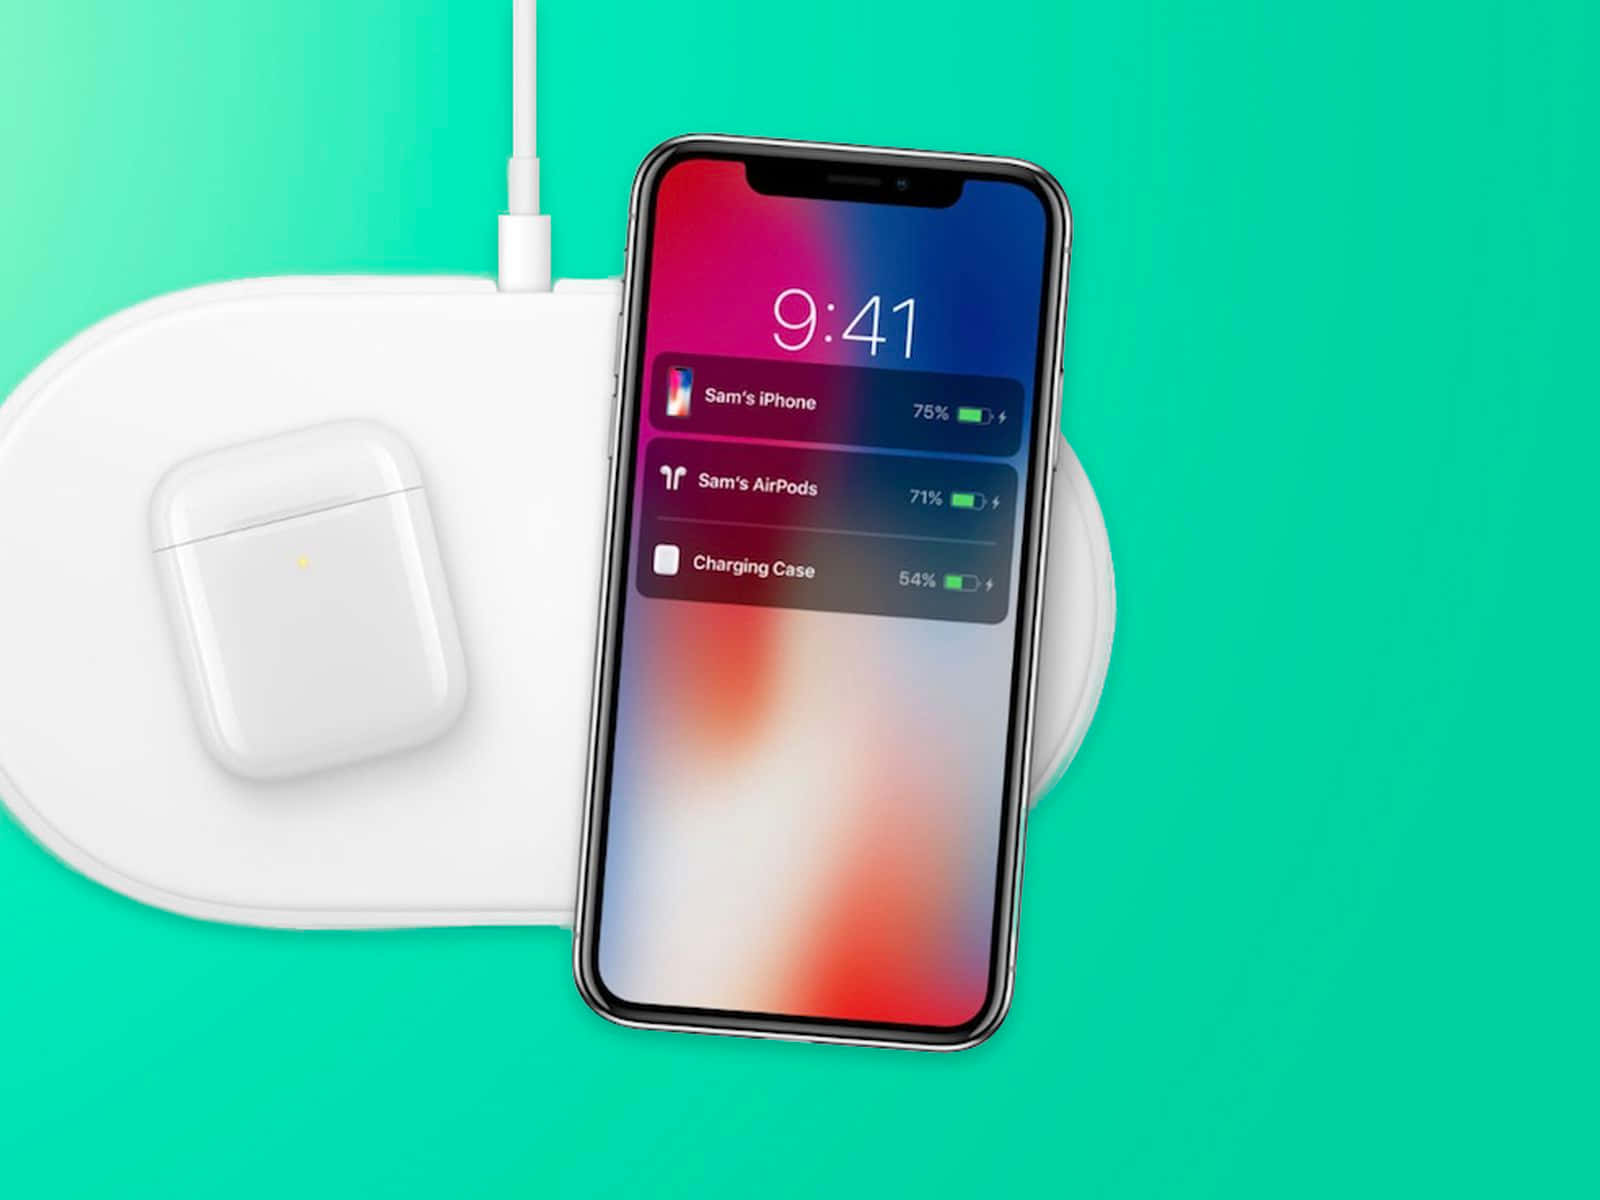 Goodbye to plugging wires - embrace wireless charging! Wallpaper